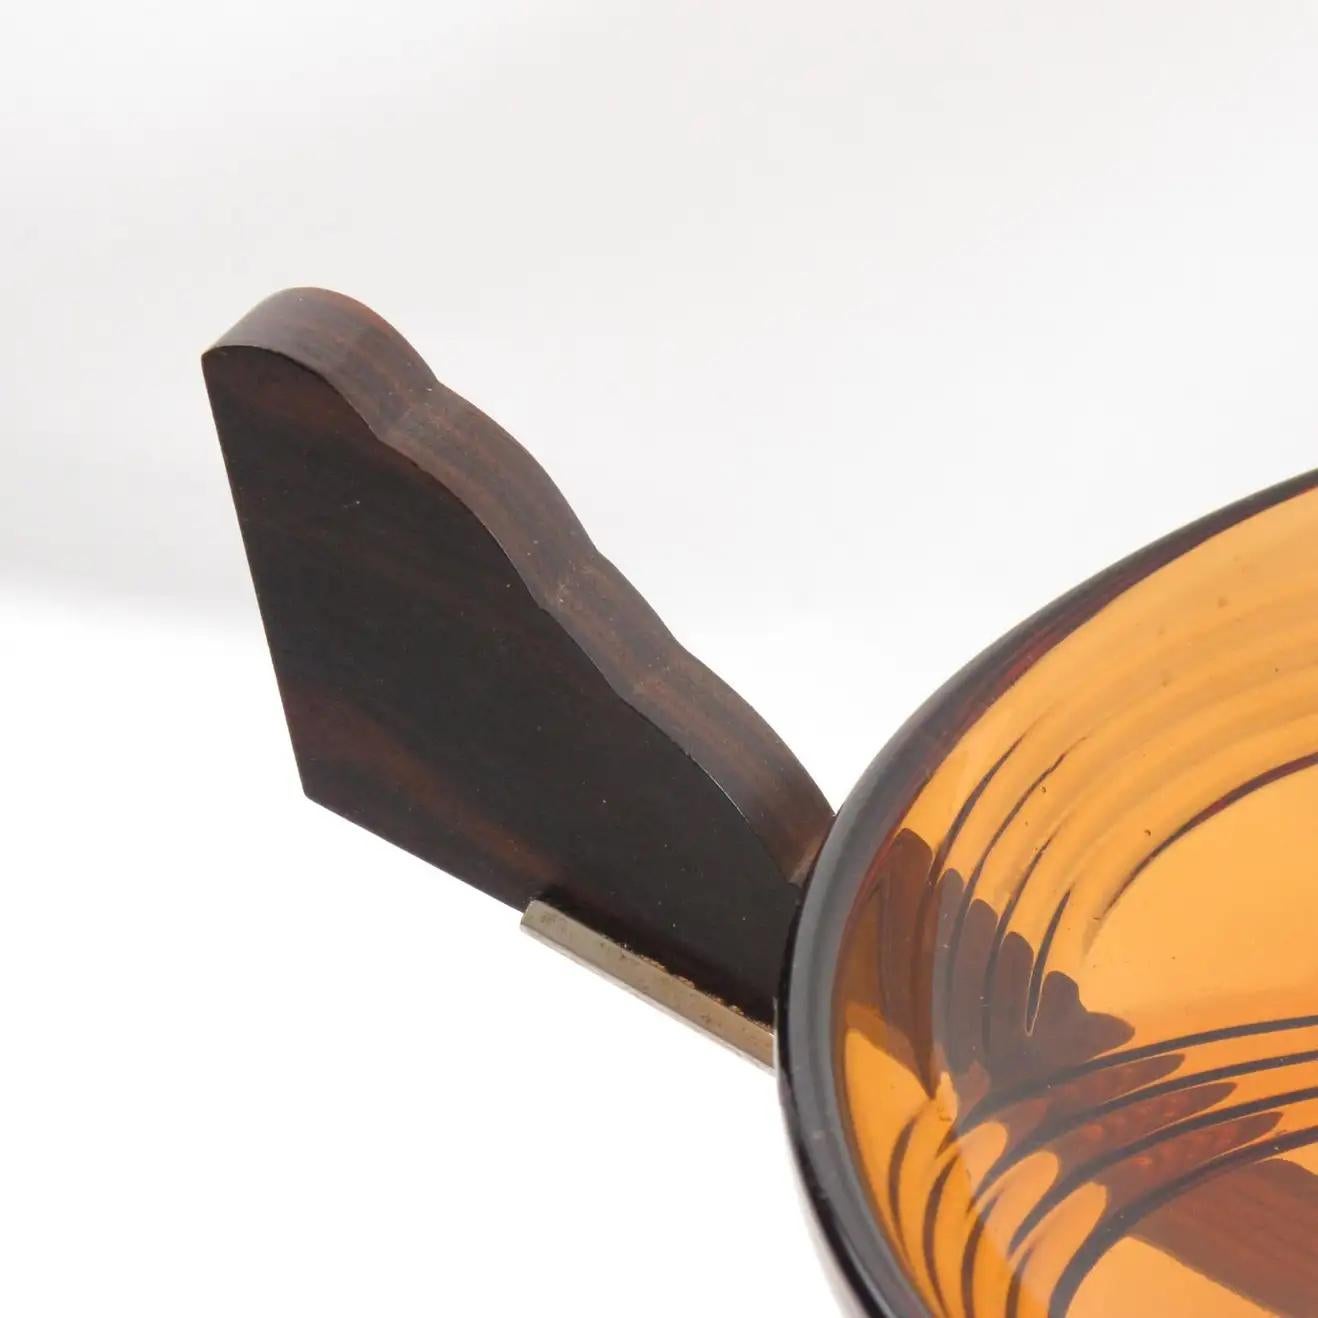 Mid-20th Century Art Deco Macassar Wood and Glass Centerpiece Bowl, France 1930s For Sale